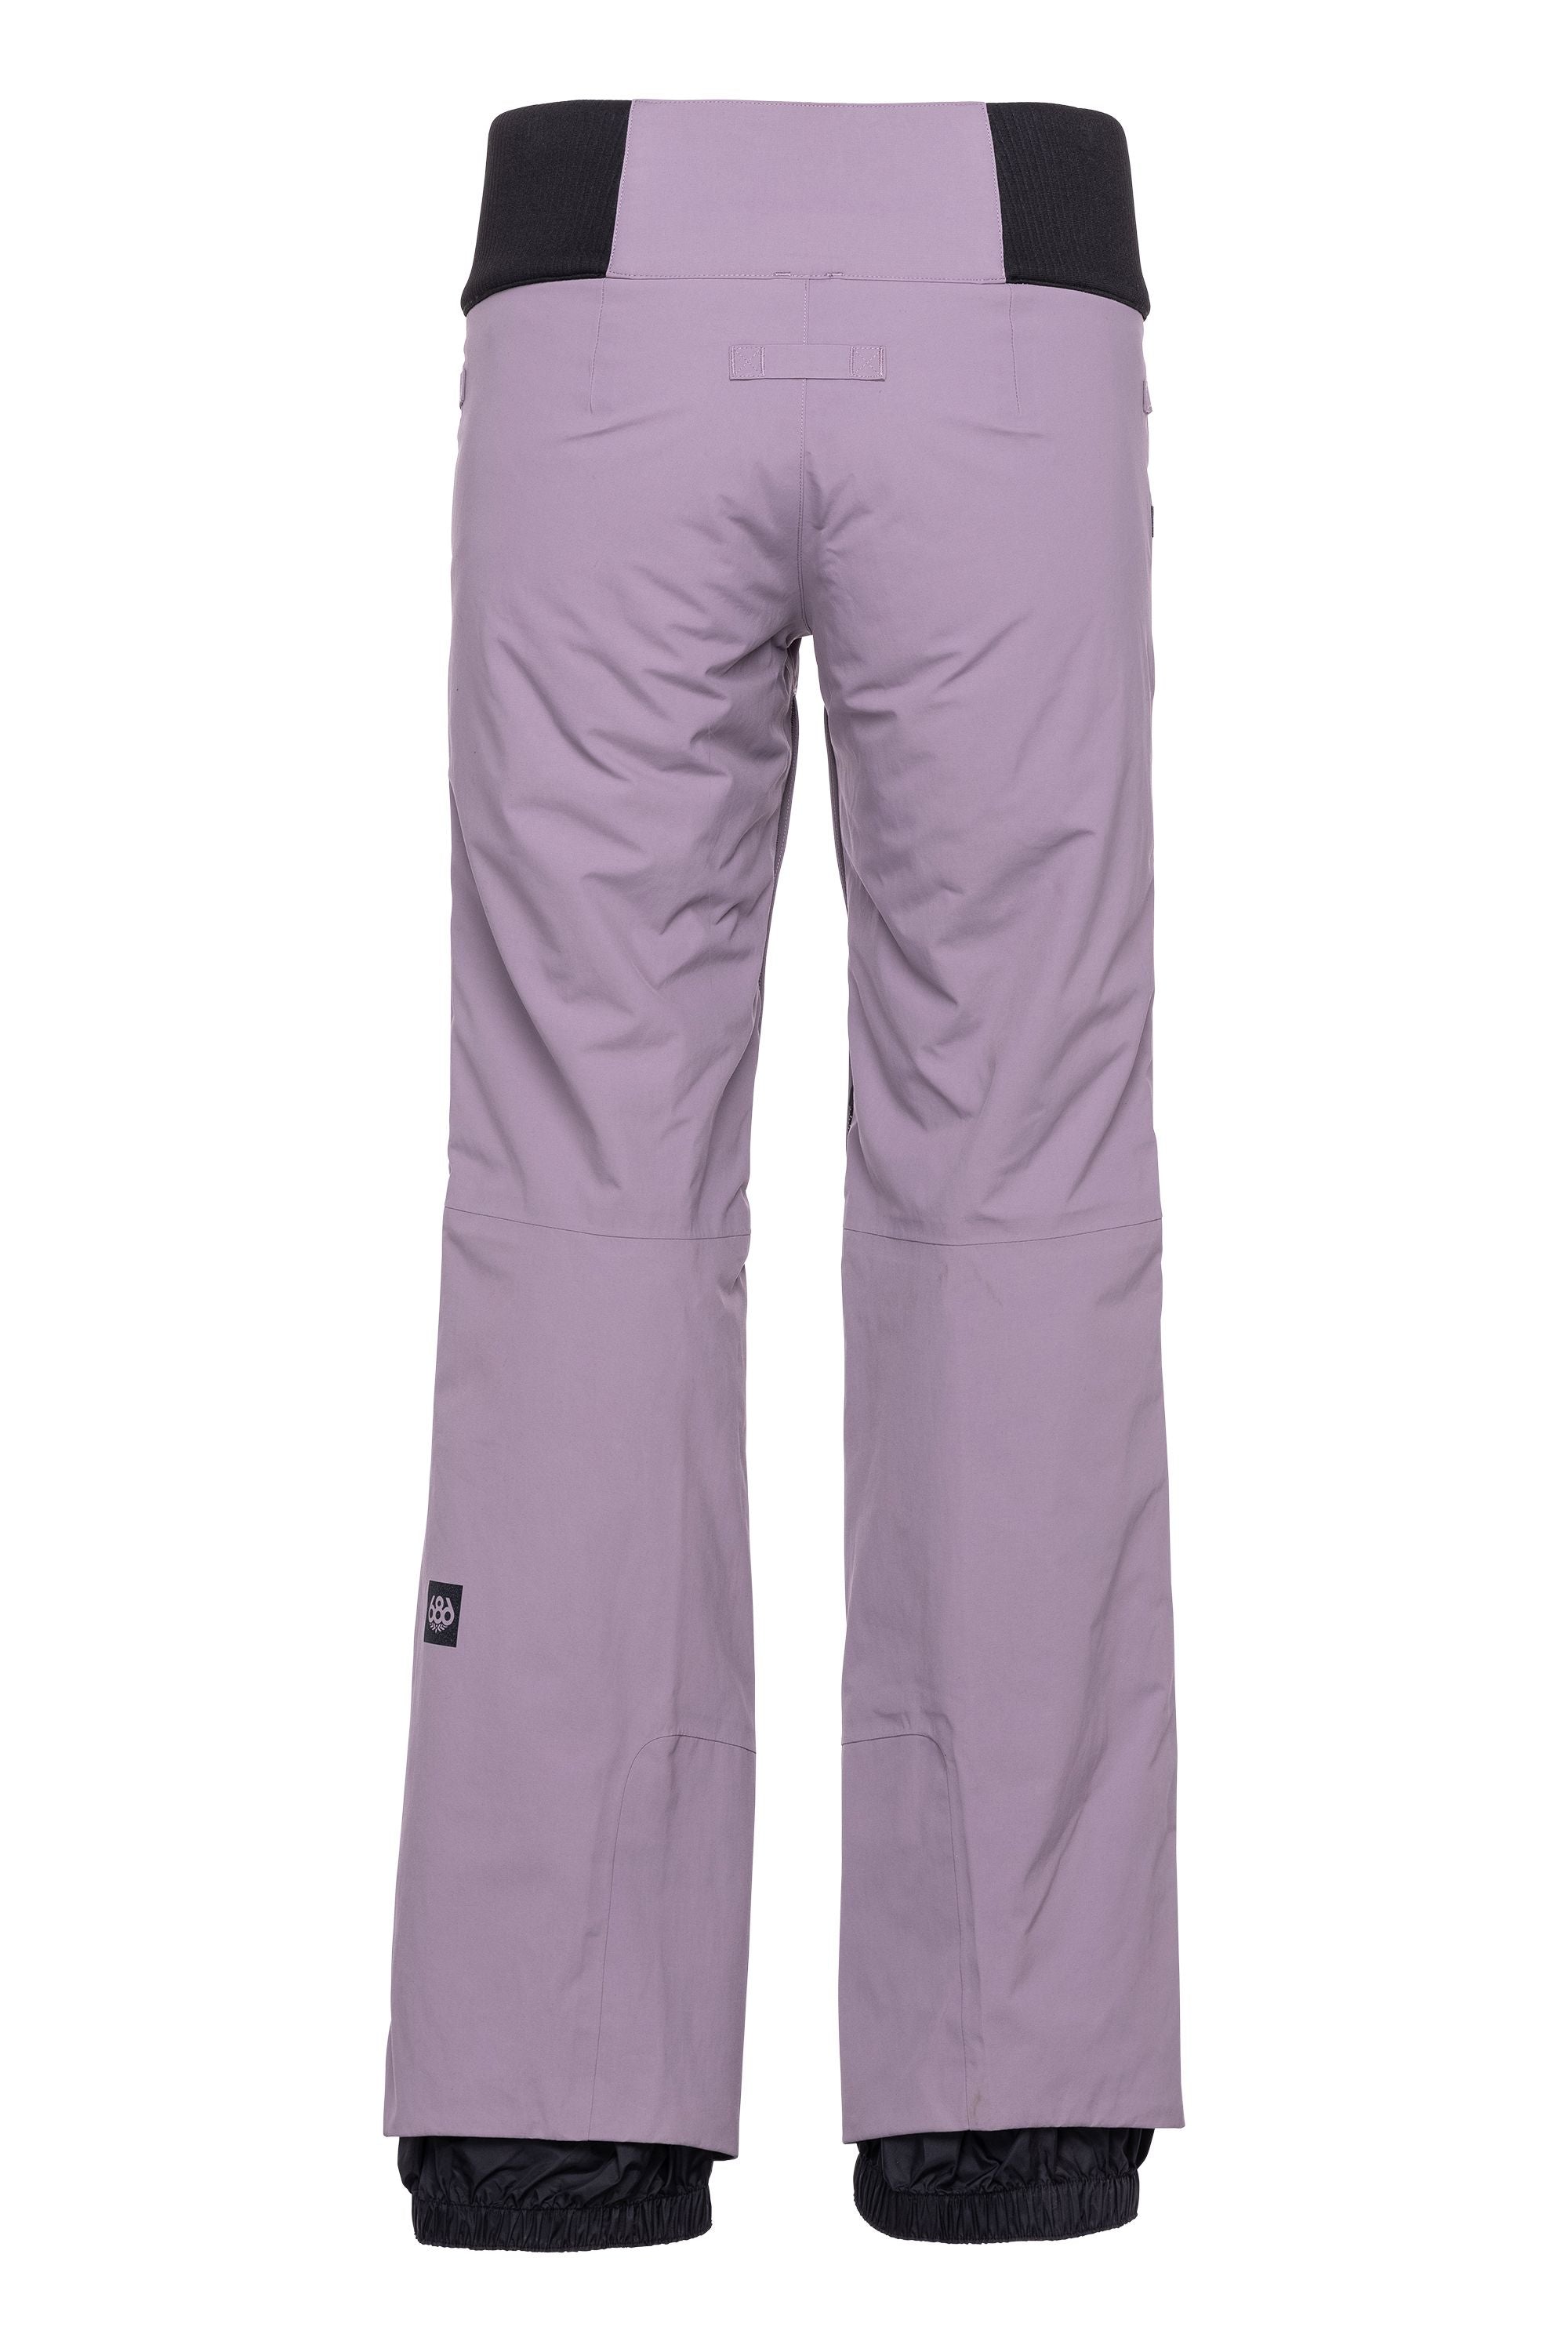 686 Women's GORE-TEX Willow Insulated Snowboard Pants Dusty Orchid 2023 Women's Snow Pants 686 